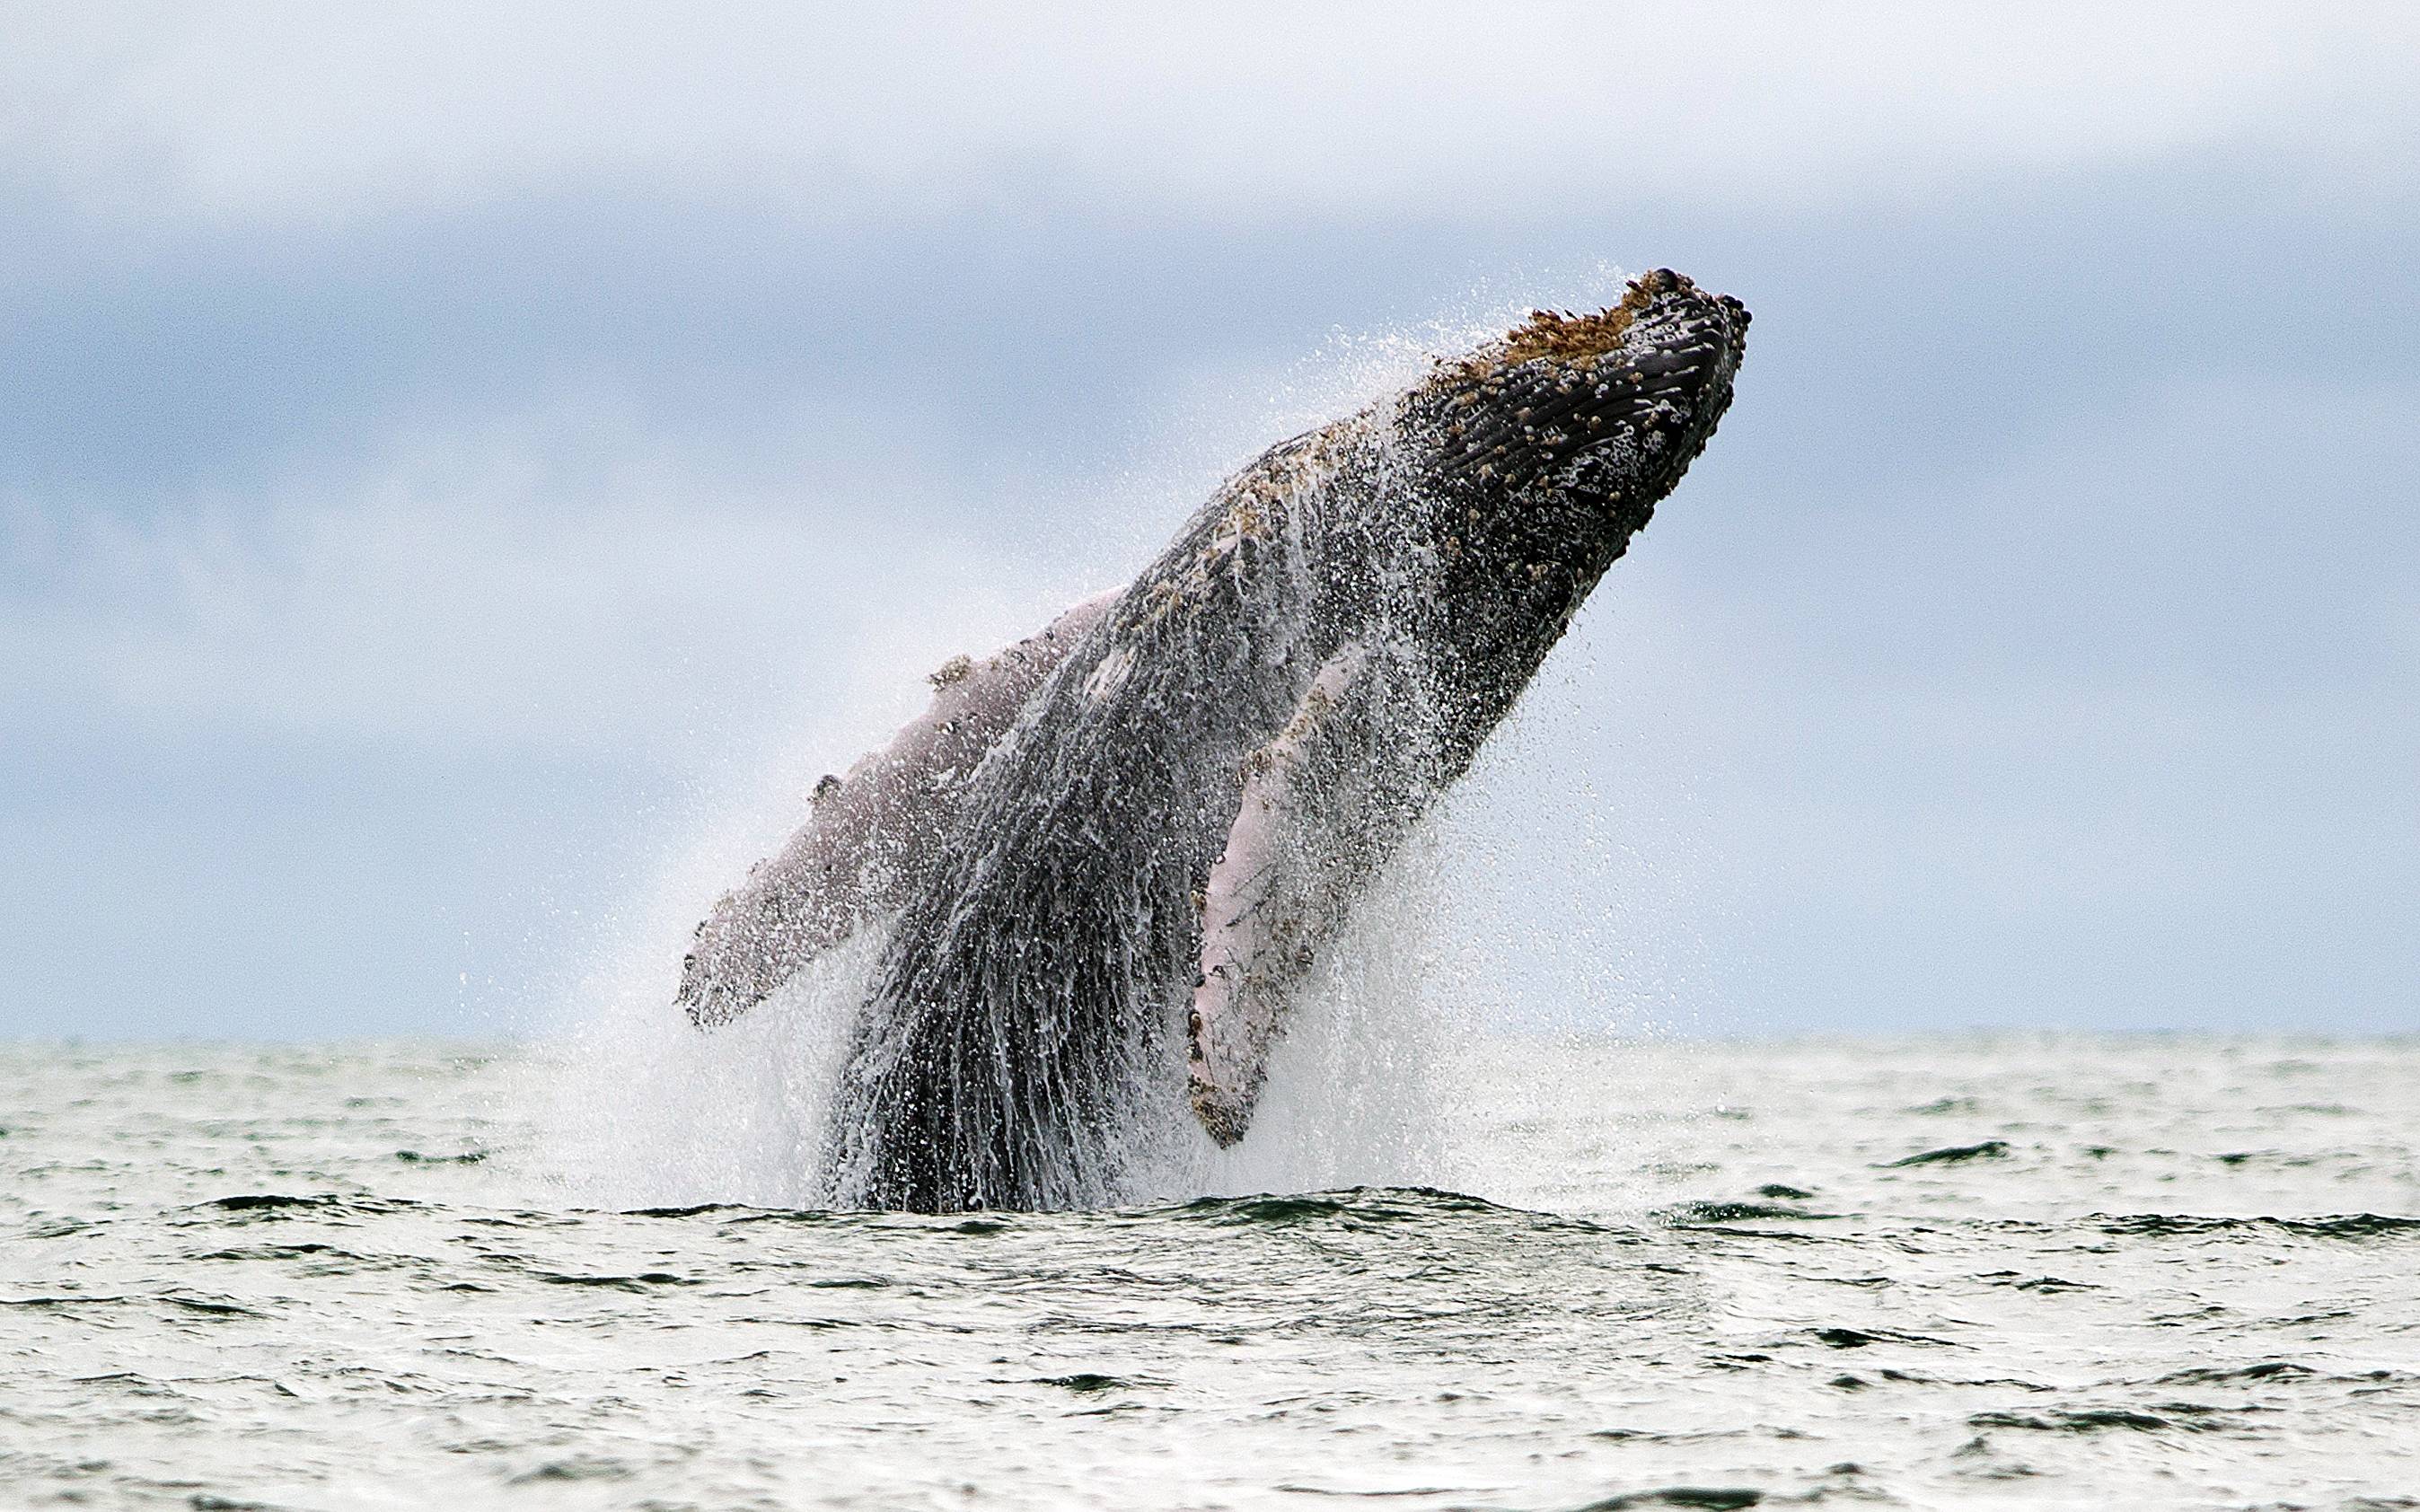 A Humpback whale jumps in the surface of the Pacific Ocean at the Uramba Bahia Malaga natural park in Colombia, on July 16, 2013. Humpback whales (Megaptera novaeangliae) migrate annually from the Antarctic Peninsula to peek into the Colombian Pacific Ocean coast, with an approximate distance of 8,500 km, to give birth and nurse their young. Humpback whales have a life cycle of 50 years or so and is about 18 meters. AFP PHOTO/Luis ROBAYO        (Photo credit should read LUIS ROBAYO/AFP/Getty Images)